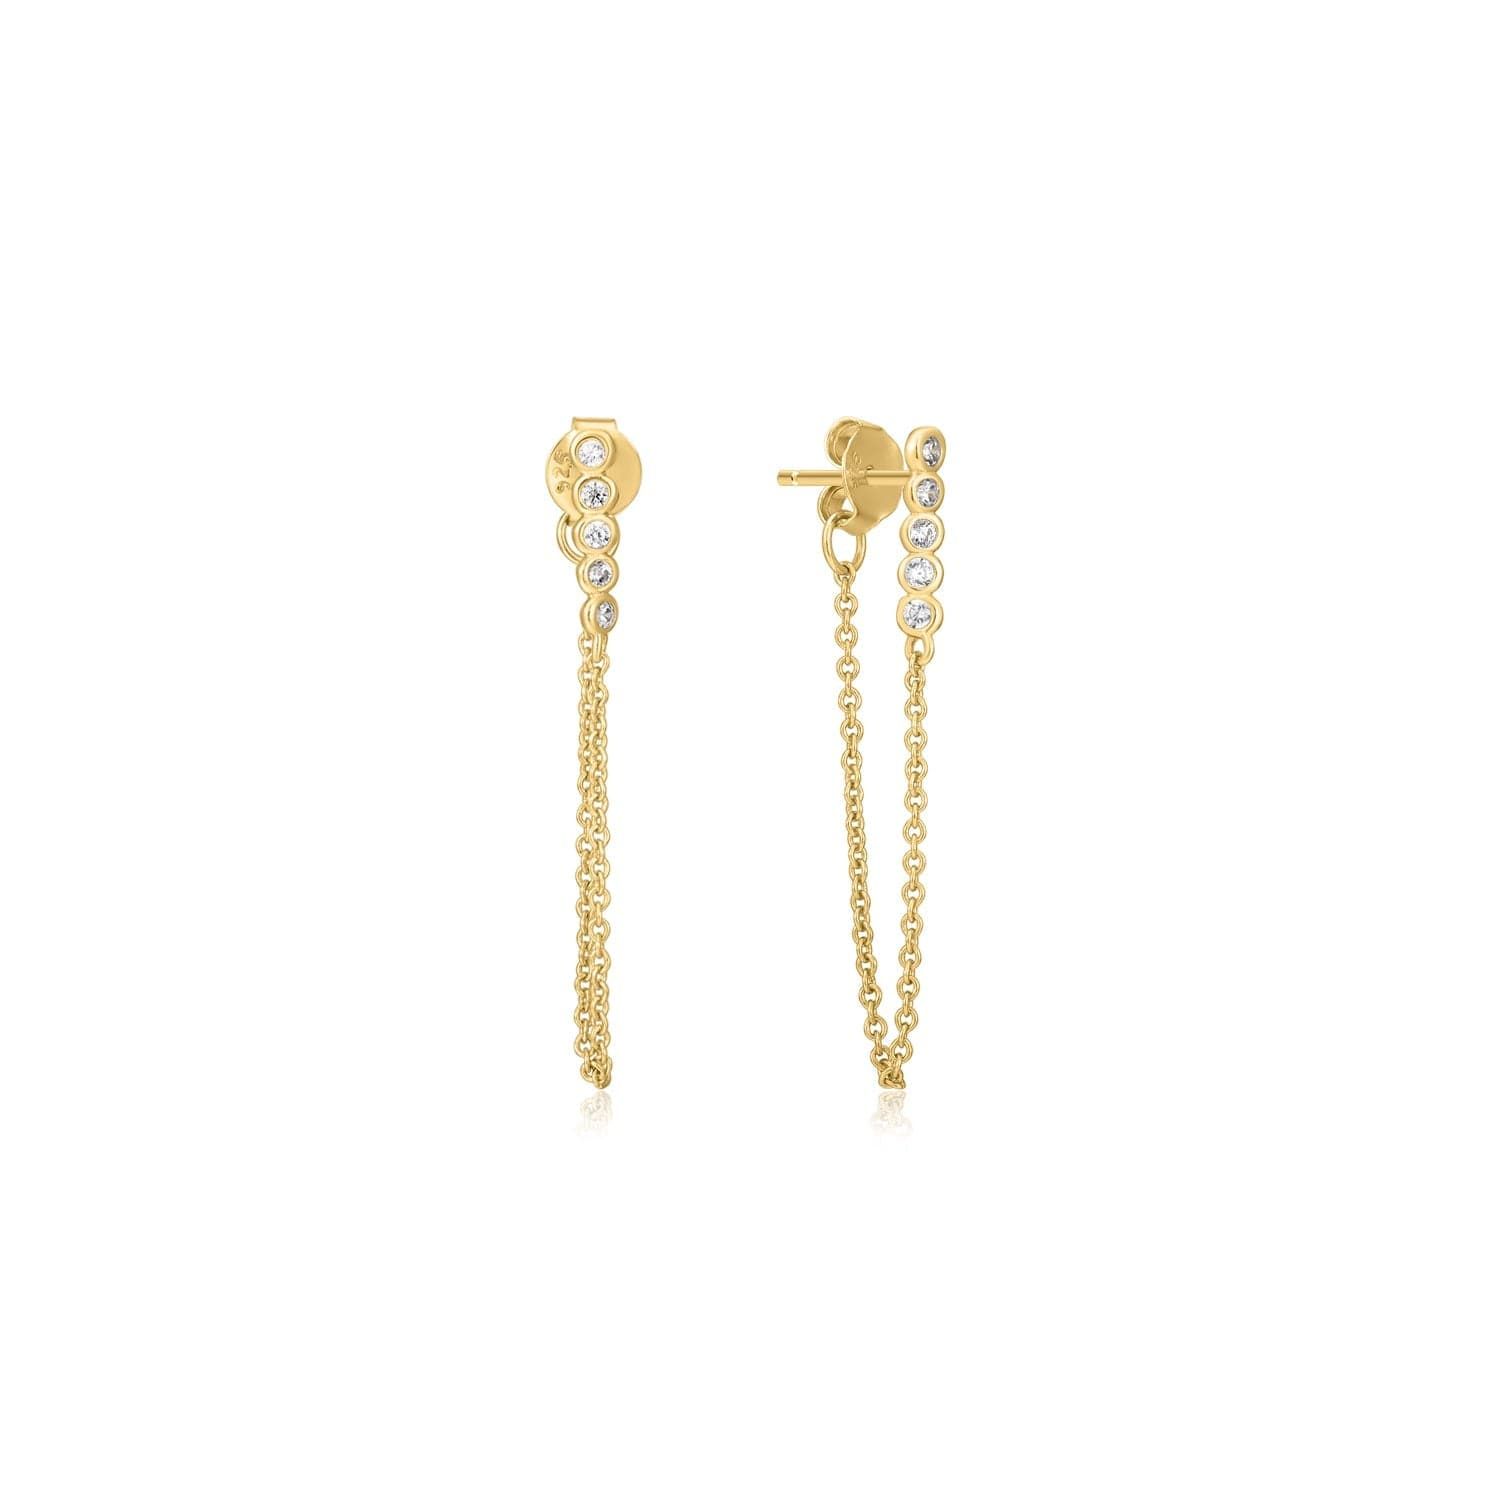 a pair of gold earrings with a chain